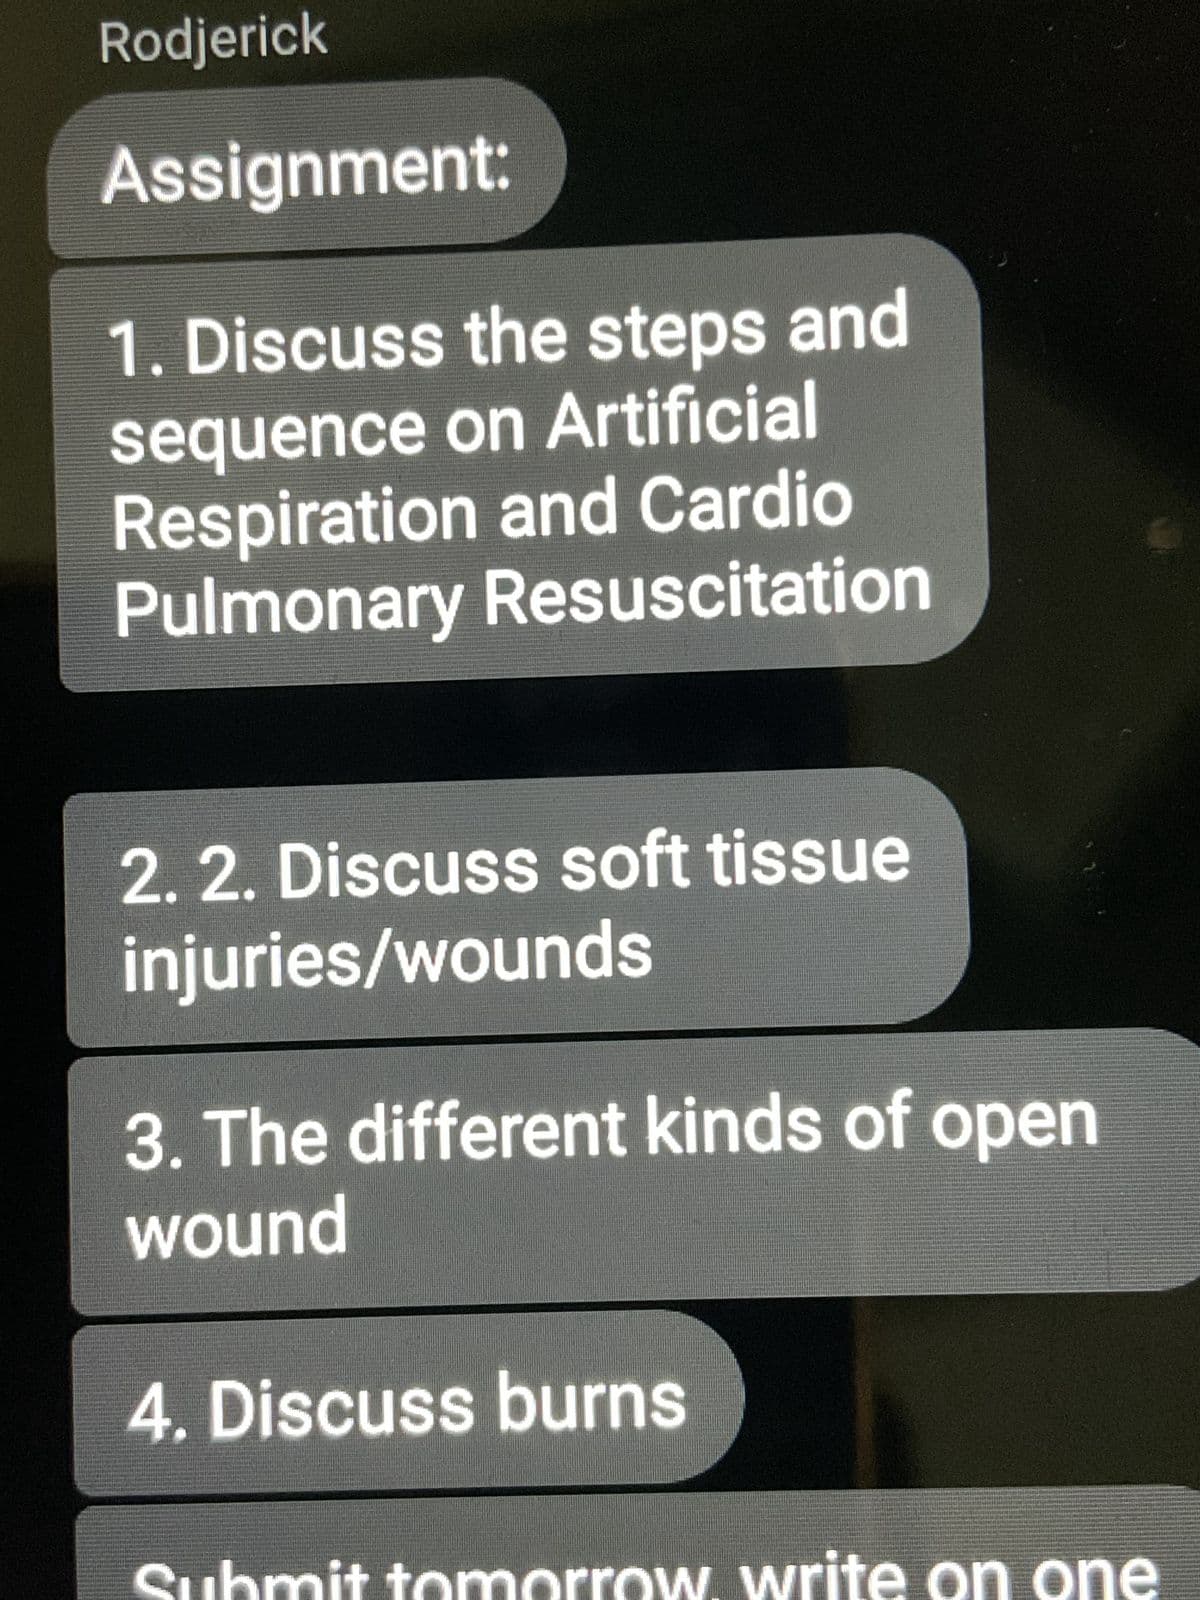 Rodjerick
Assignment:
1. Discuss the steps and
sequence on Artificial
Respiration and Cardio
Pulmonary Resuscitation
2. 2. Discuss soft tissue
injuries/wounds
3. The different kinds of open
wound
4. Discuss burns
Submit tomorrow. write on one